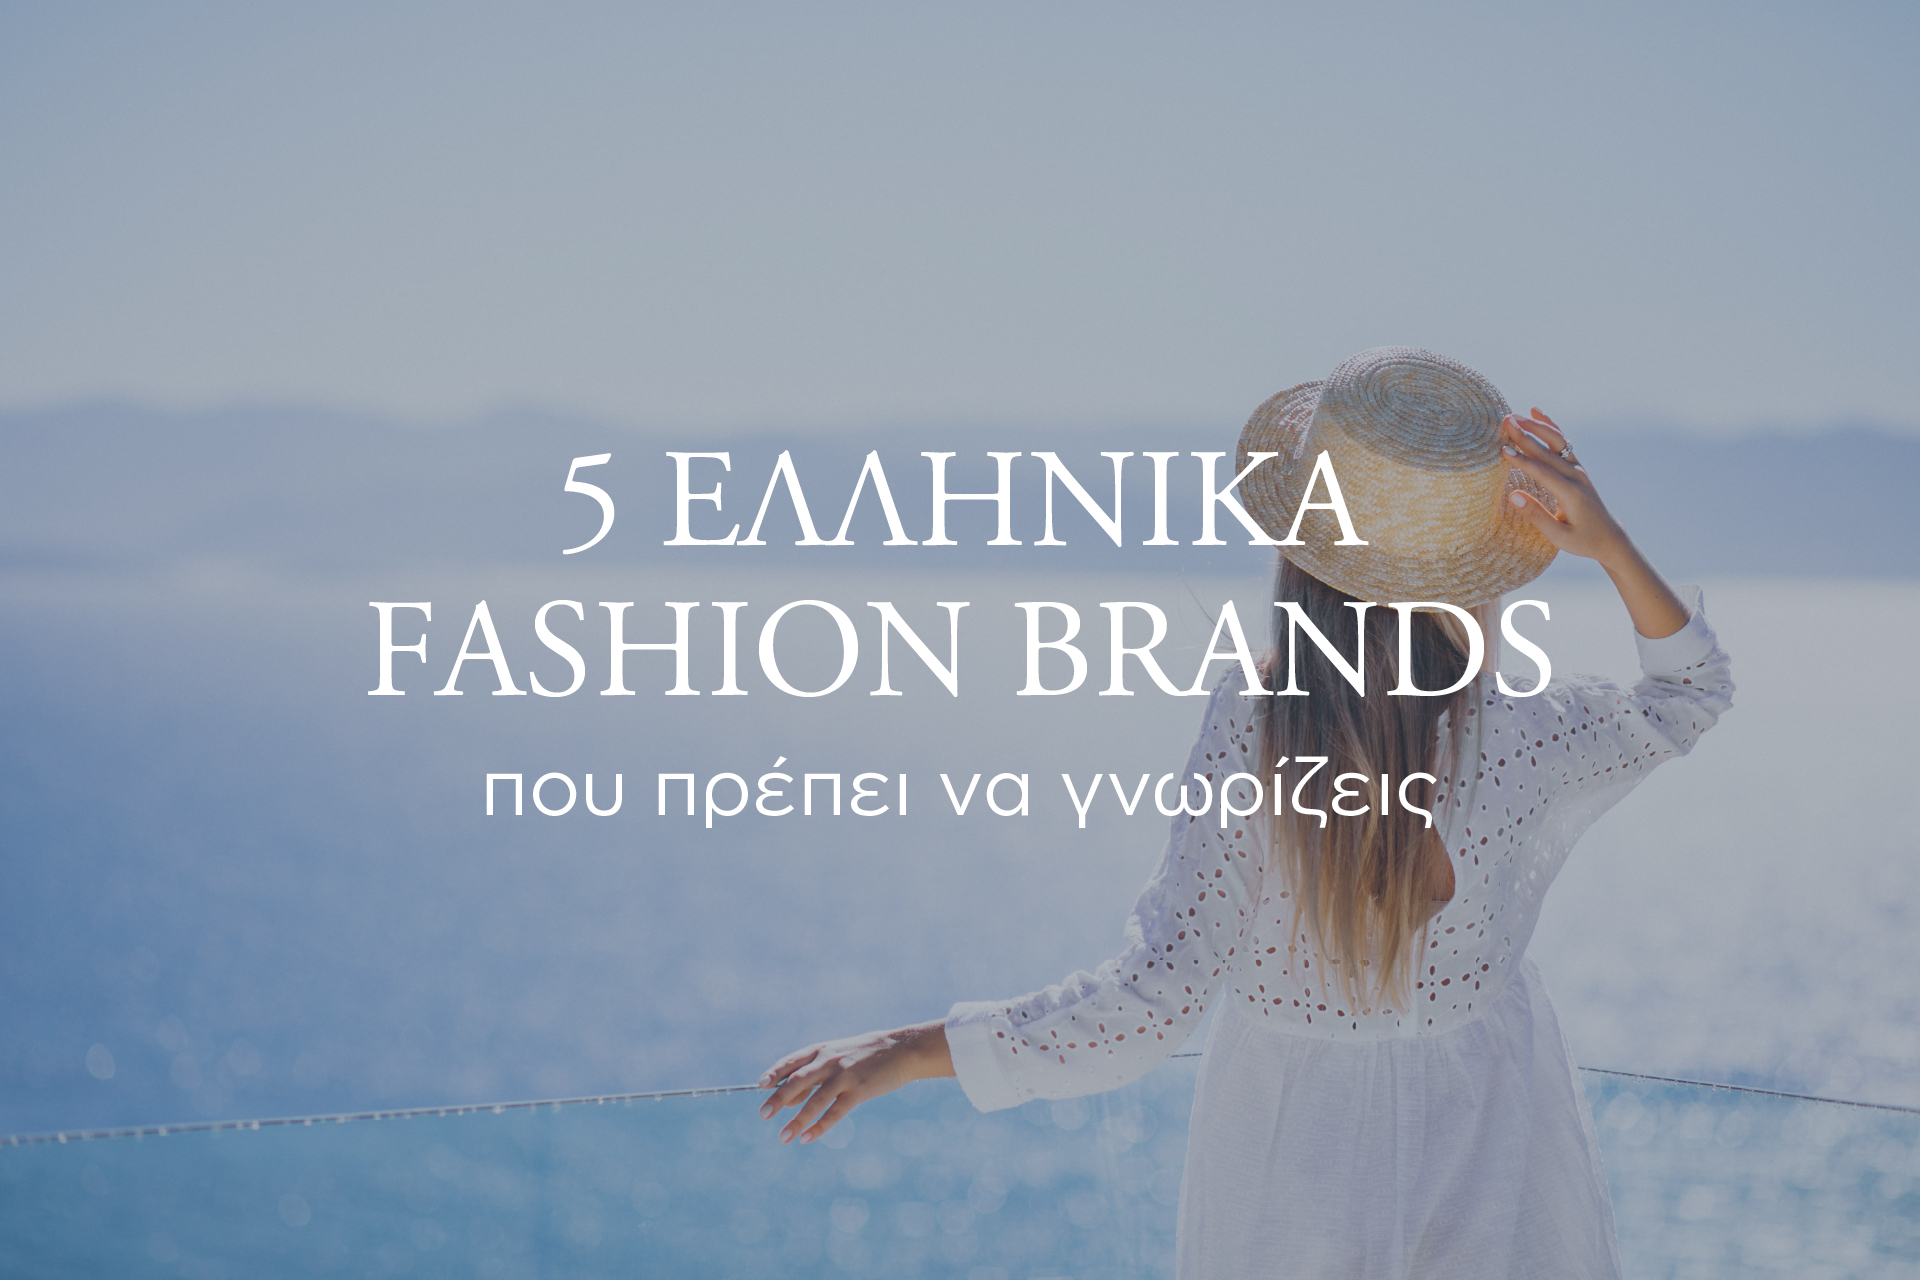 5 Greek fashion brands you need to know